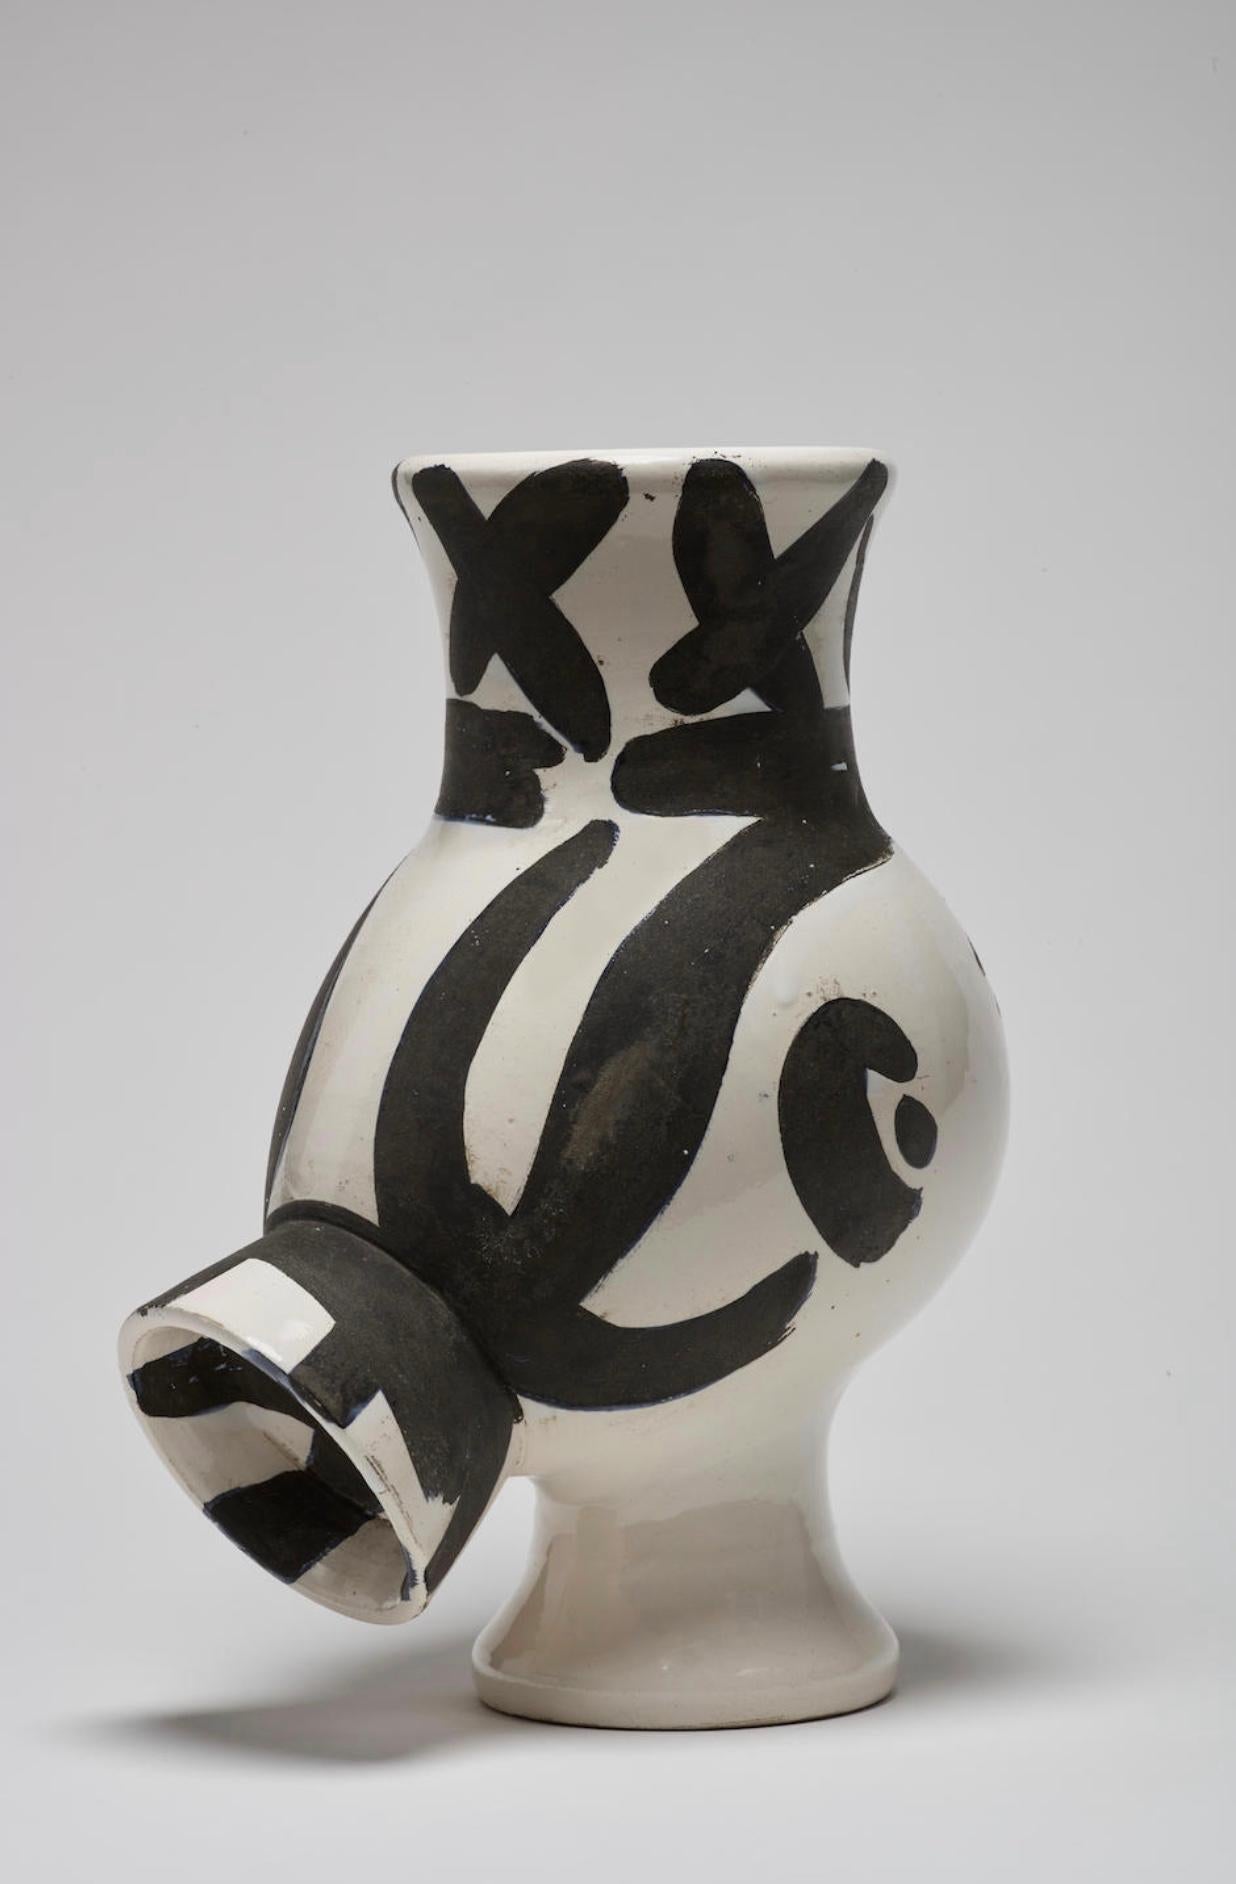 Chouette, Picasso, Pitcher, Design, 1950's, Ceramic, Black and white, Animal

Chouette femme
Ed. 500 pcs
1951
Earthenware ceramic vase with engobe and  glaze
H. 30 cm
Stamped and signed underside : Edition Picasso / Madoura Plein Feu / Edition